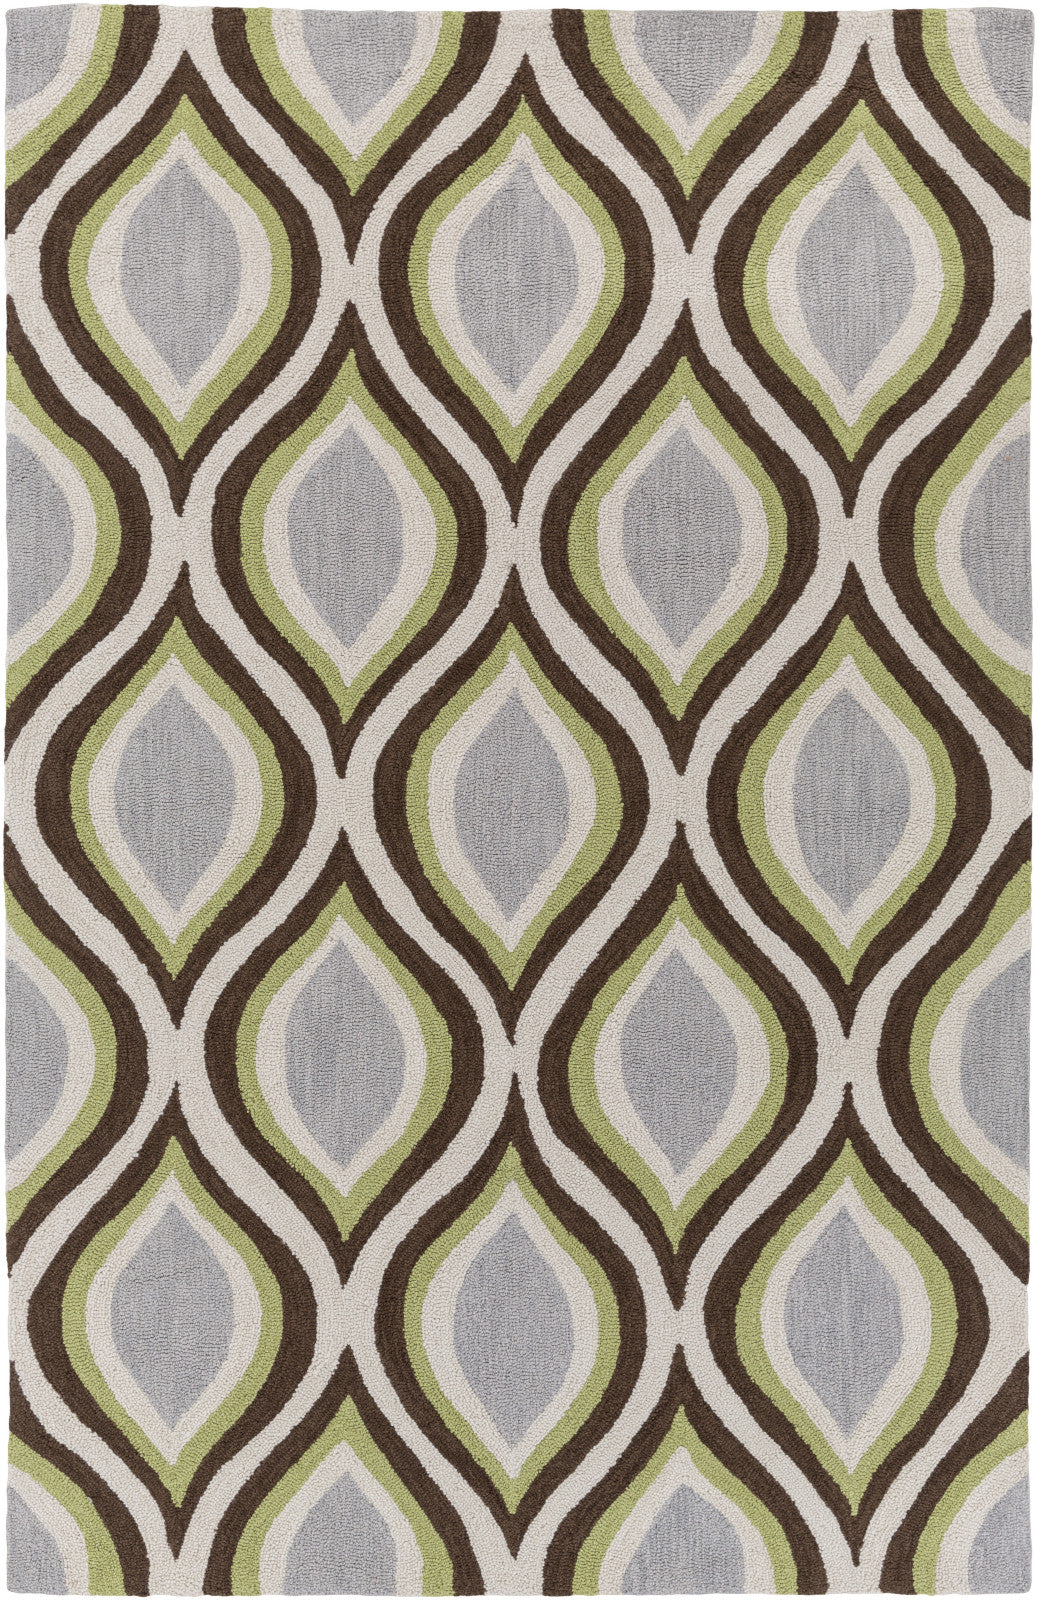 Artistic Weavers Holden Lucy Lime Green/Chocolate Brown Area Rug main image